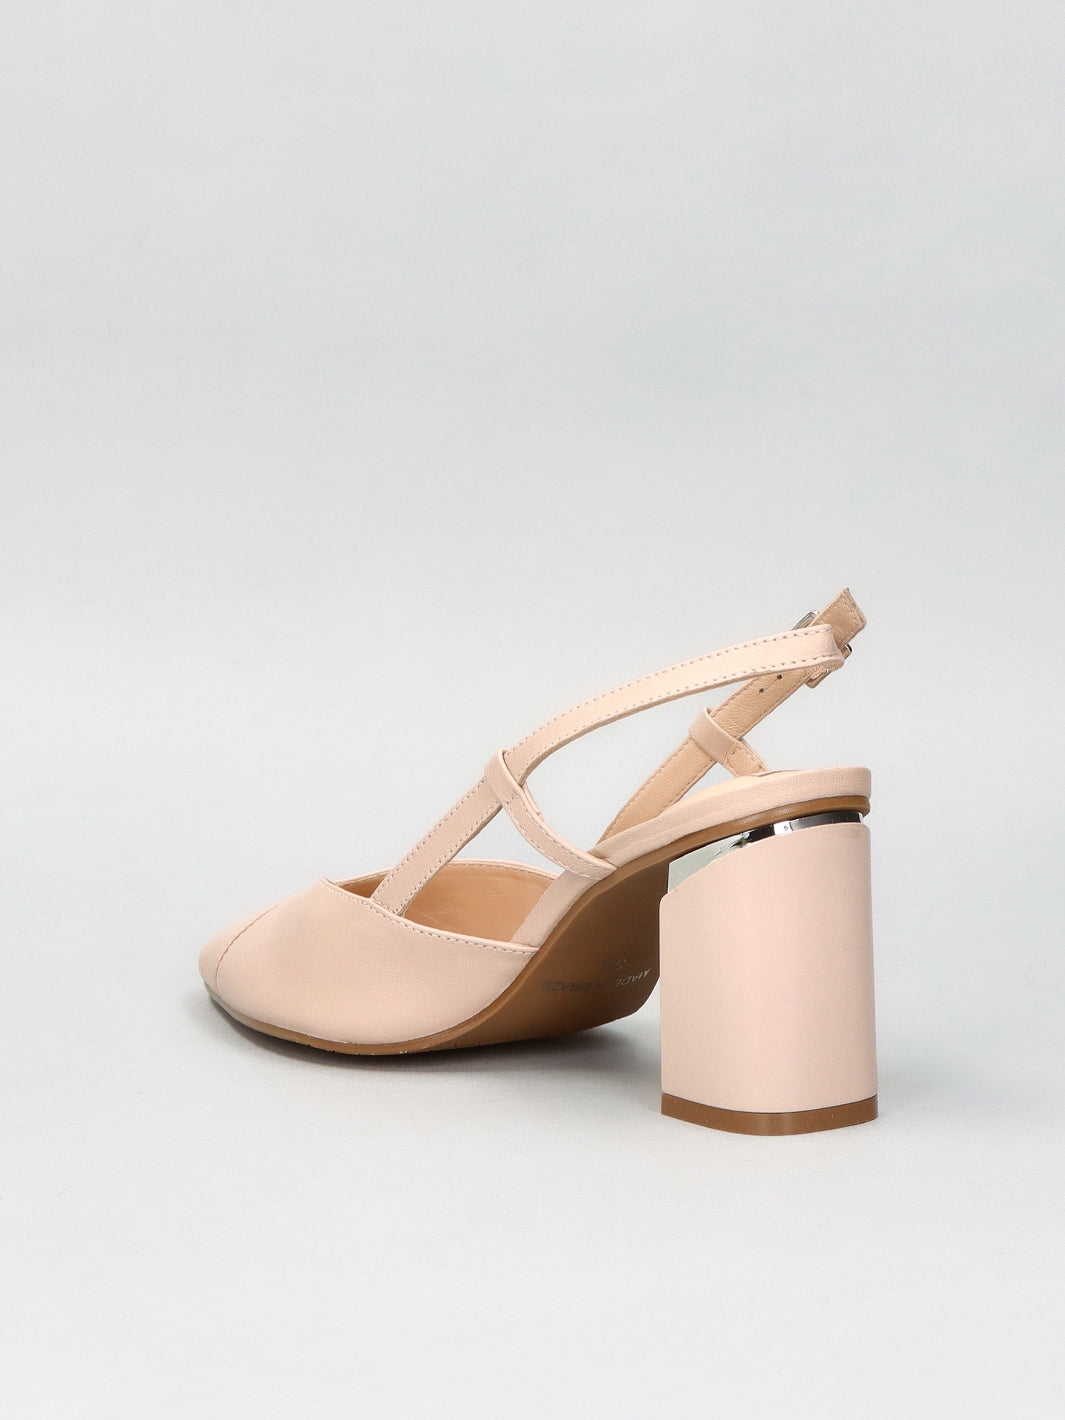 LEATHER SLINGS - LIGHT PINK